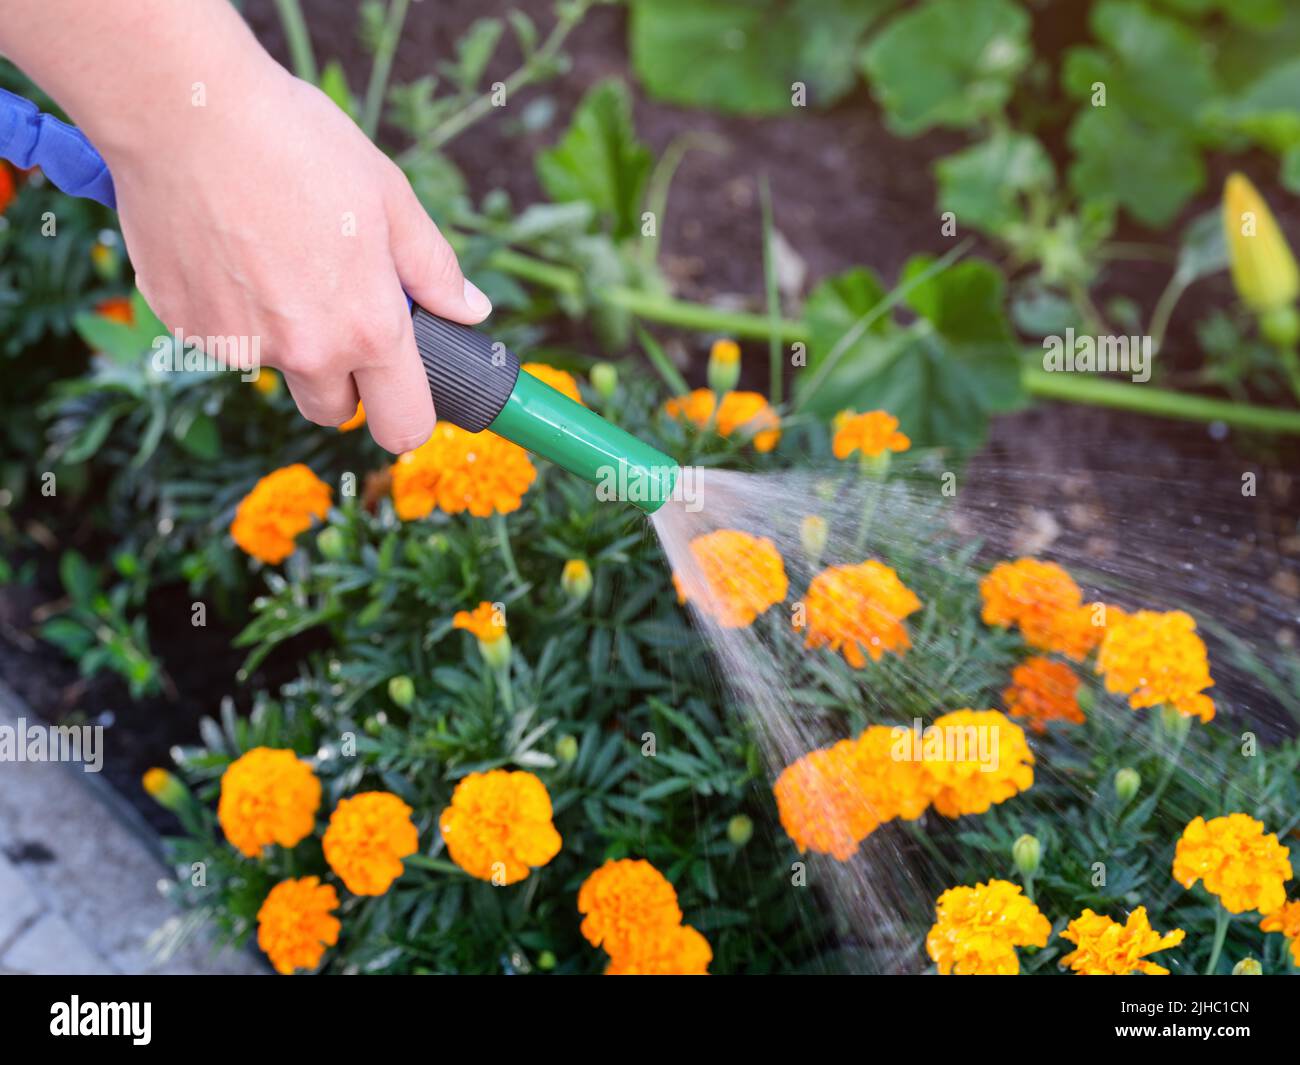 A close-up shot of a woman watering tagetes (marigolds) with a hose Stock Photo